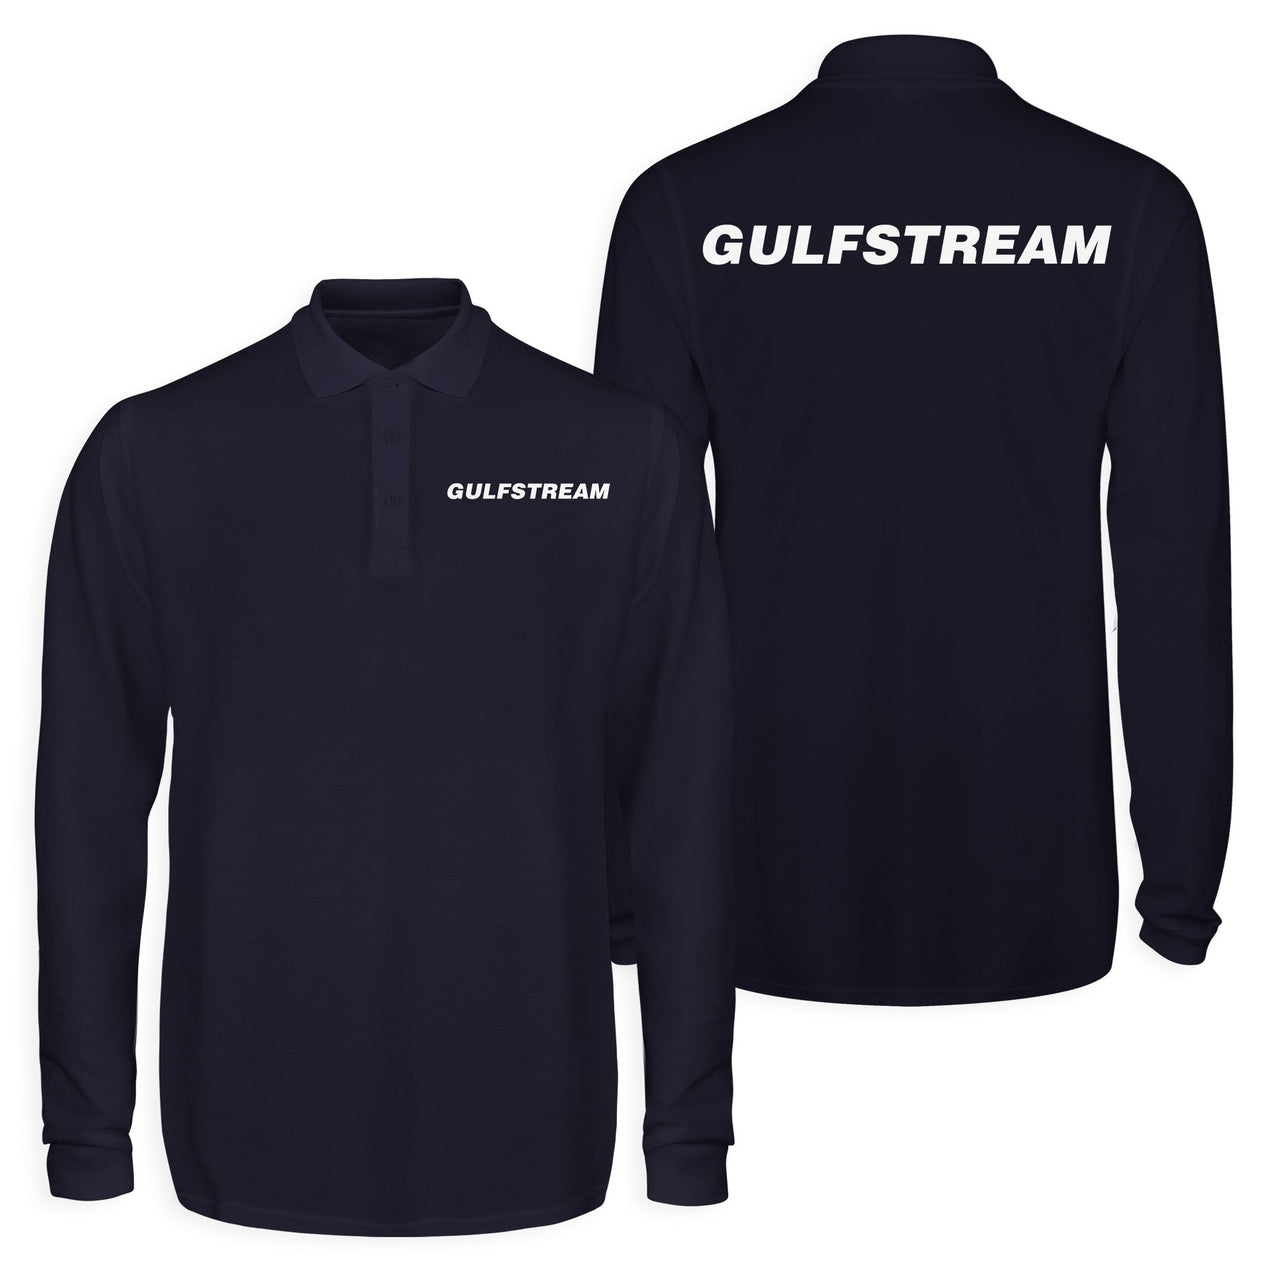 Gulfstream & Text Designed Long Sleeve Polo T-Shirts (Double-Side)